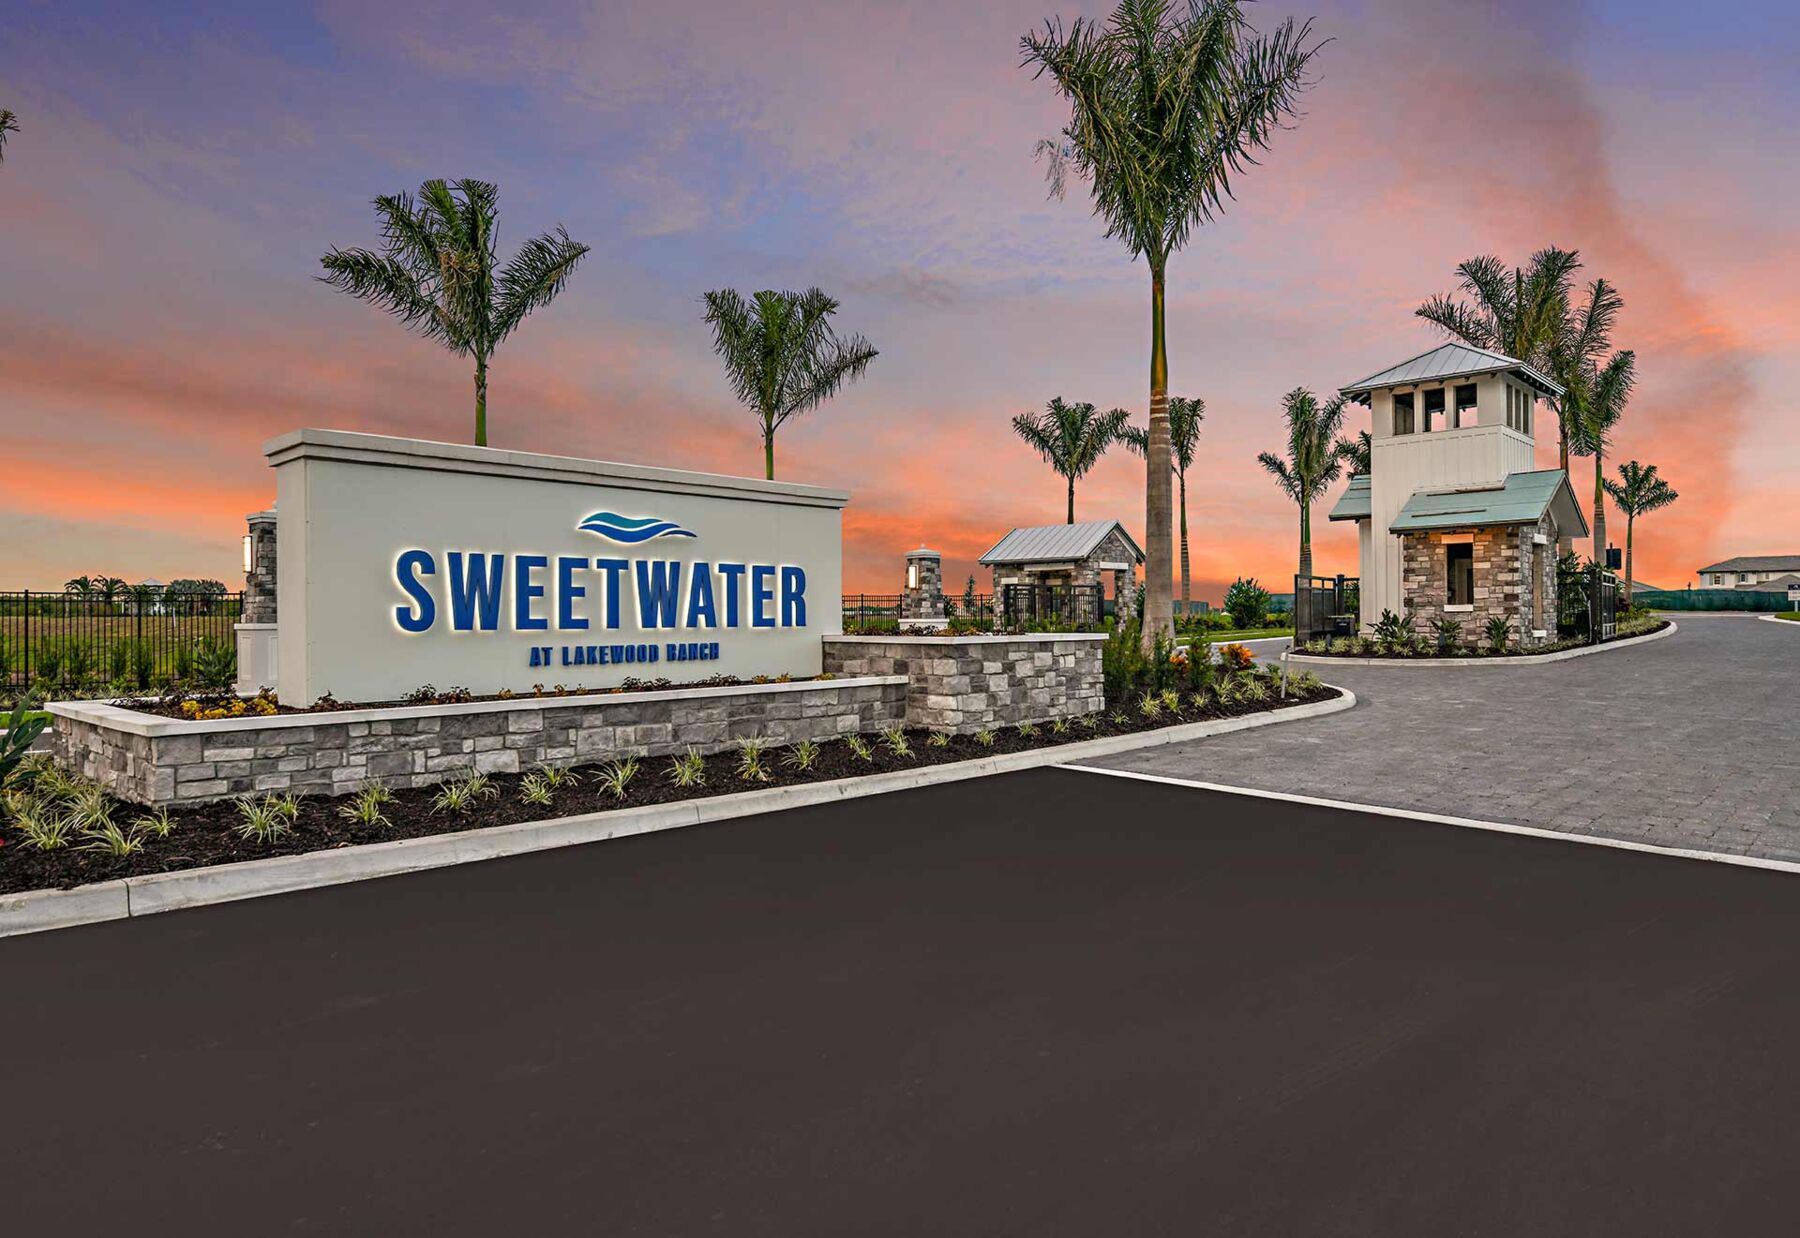 Lakewood Ranch is a great place to live, and the Sweetwater neighborhood is one of the best in the area. It's a quiet, peaceful community with plenty of activities and amenities to keep residents busy. If you're looking for a place to call home, Lakewood Ranch is definitely worth considering.